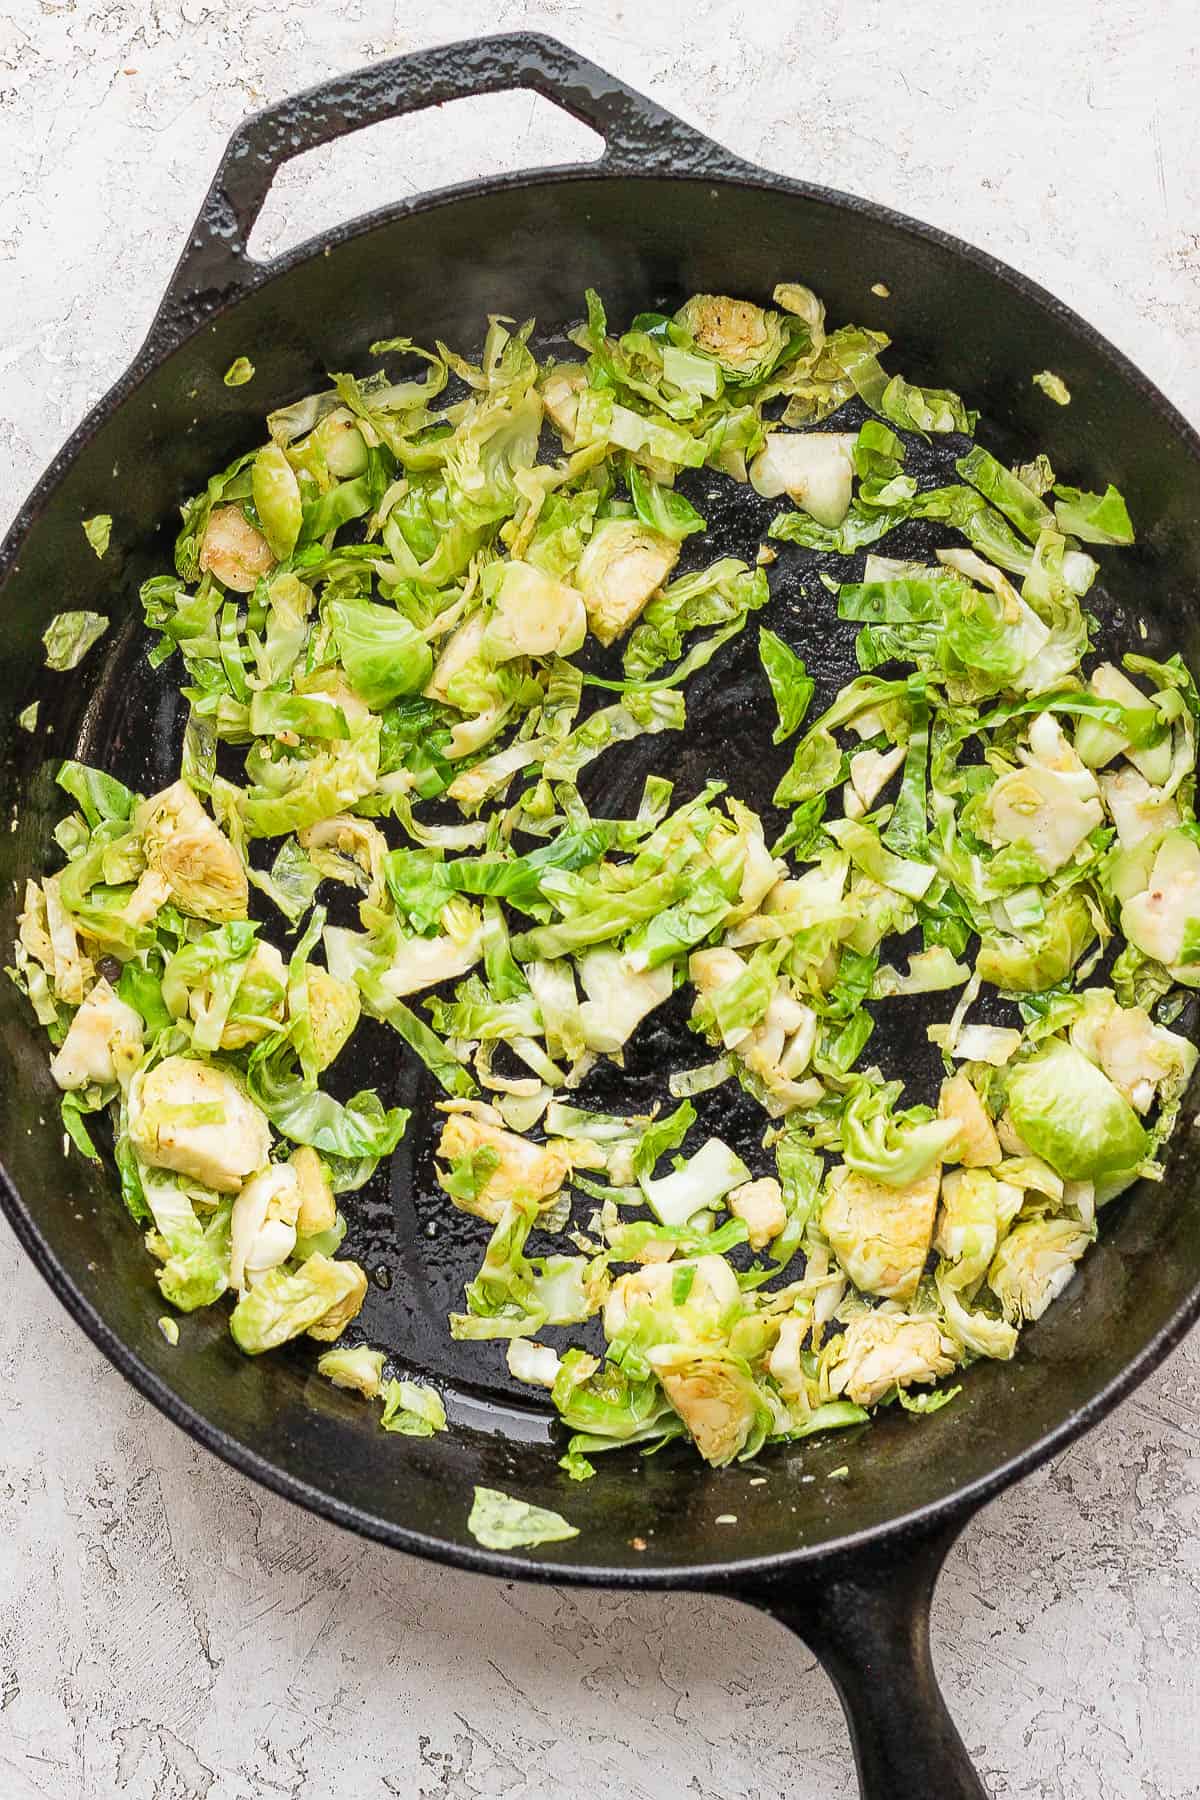 Shaved brussel sprouts and garlic in the skillet.